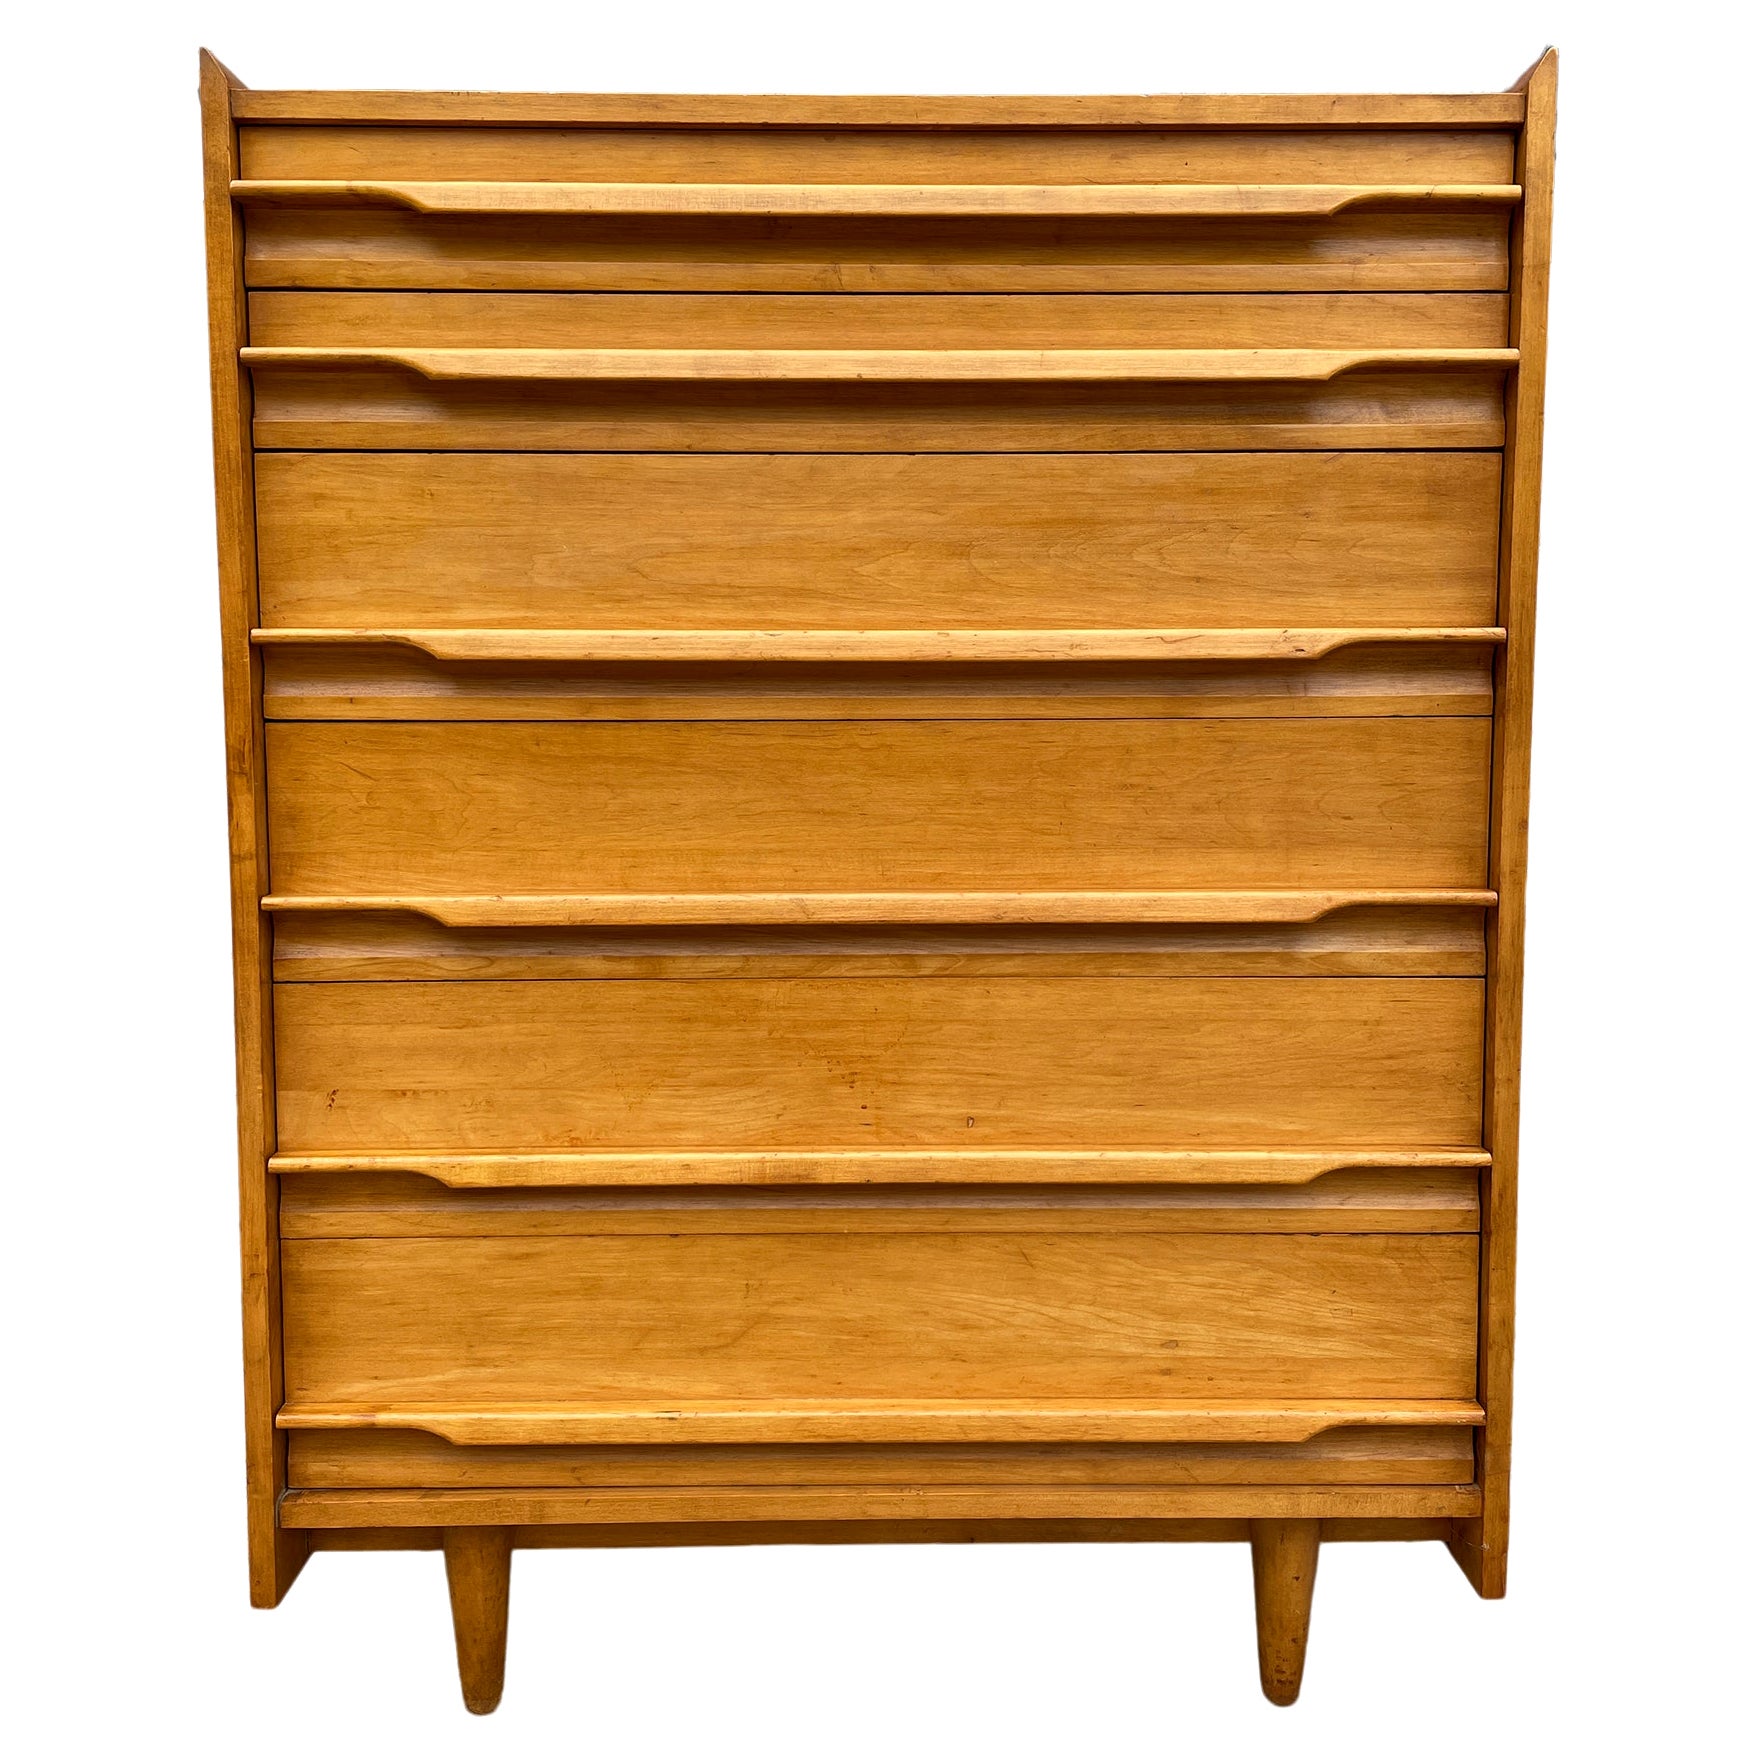 Unique Mid-Century Modern American Maple Tall 6 Drawer Dresser by Crawford For Sale